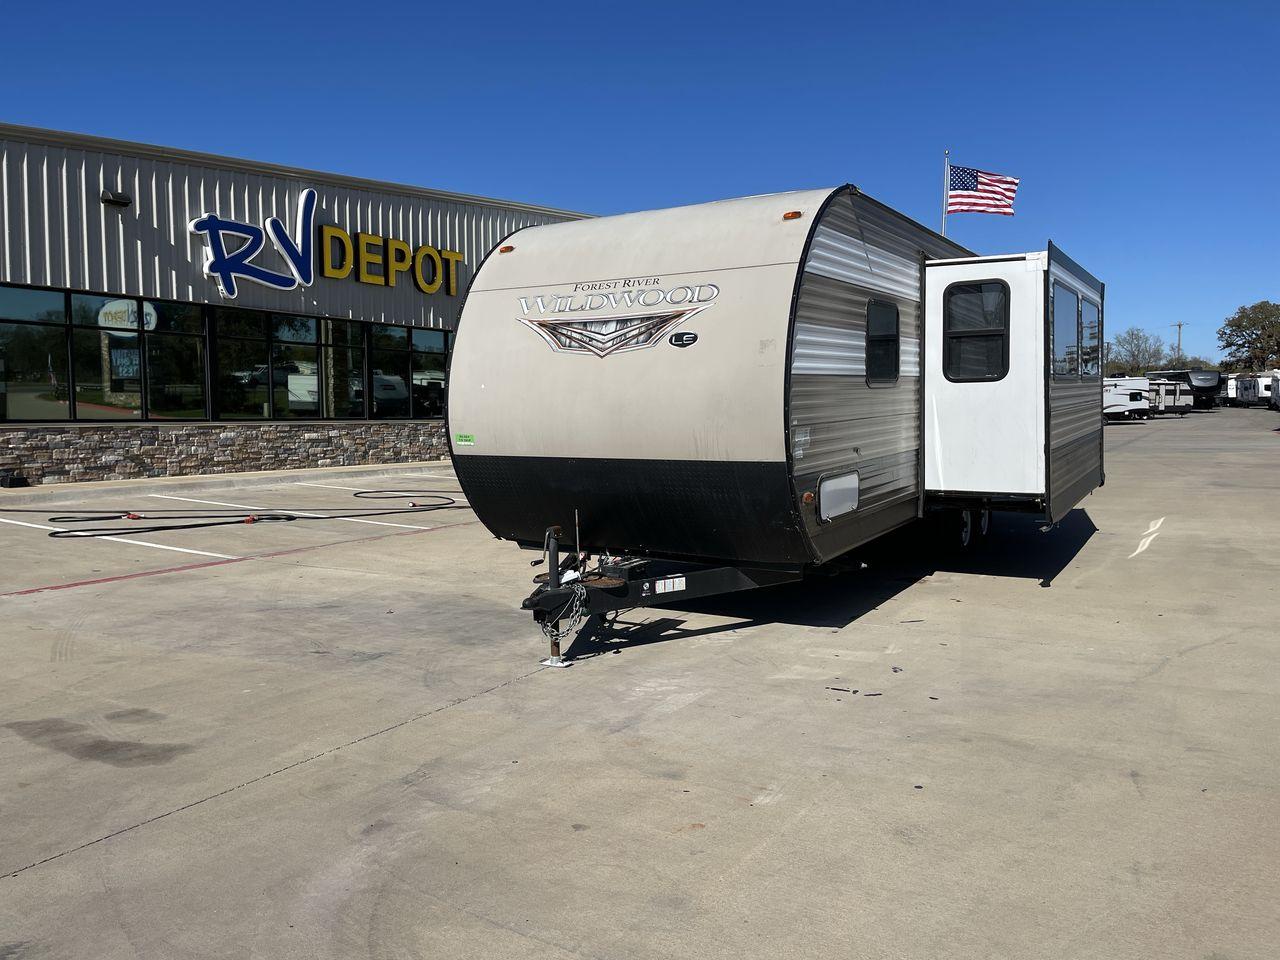 2020 WHITE FOREST RIVER WILDWOOD 26DBLE (4X4TWDB28LA) , Length: 30.4 ft. | Dry Weight: 5,868 lbs. | Gross Weight: 7775 lbs. | Slides: 1 transmission, located at 4319 N Main St, Cleburne, TX, 76033, (817) 678-5133, 32.385960, -97.391212 - Photo #0